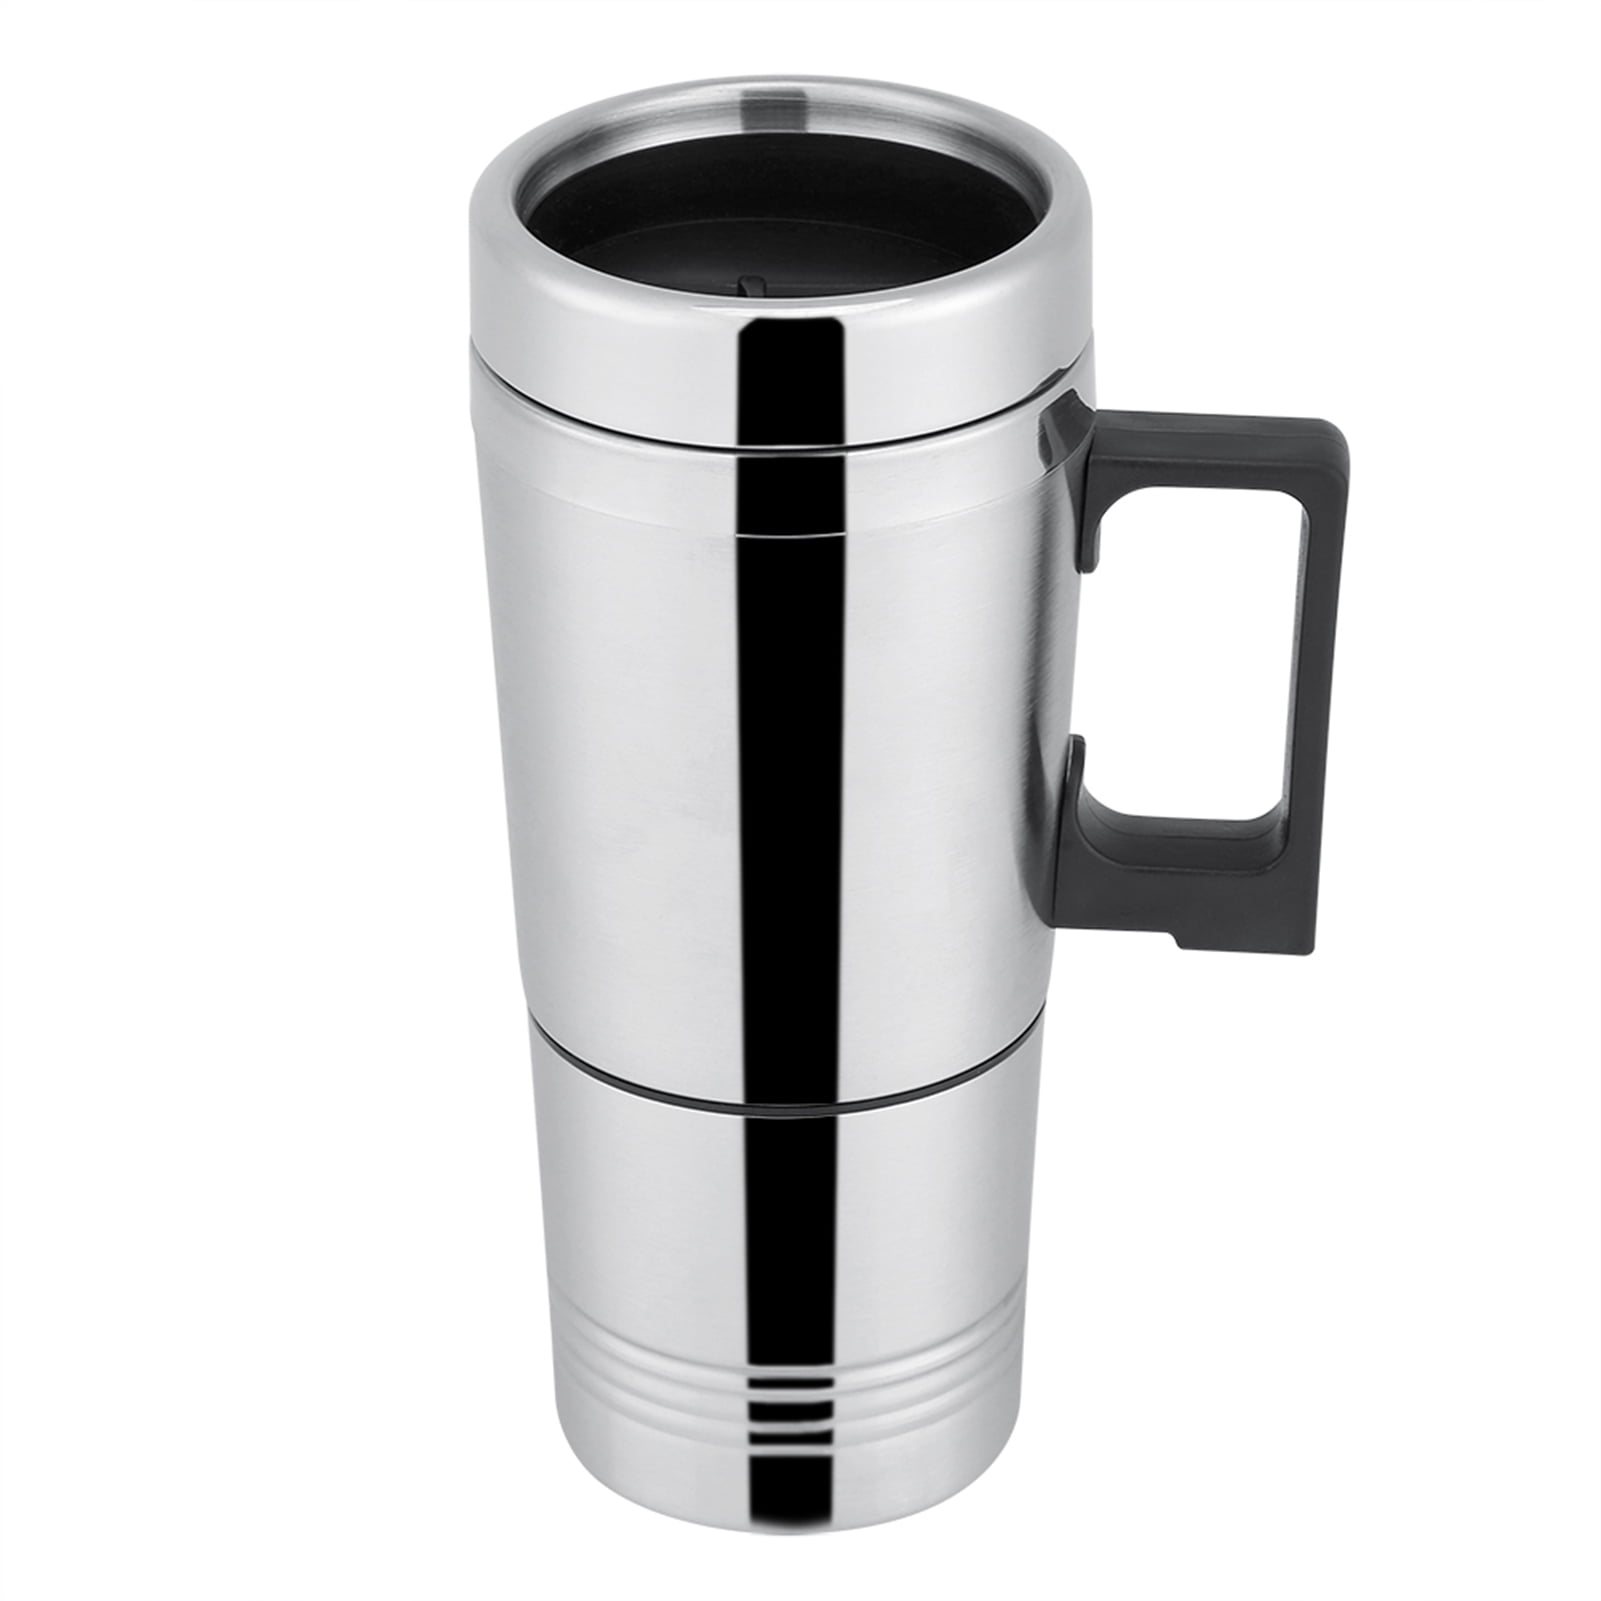  12V Car Heating Cup Car Heated Mug, 450ml Stainless Steel Travel  Electric Coffee Cup 14oz. Insulated Heated Thermos Mug : Home & Kitchen